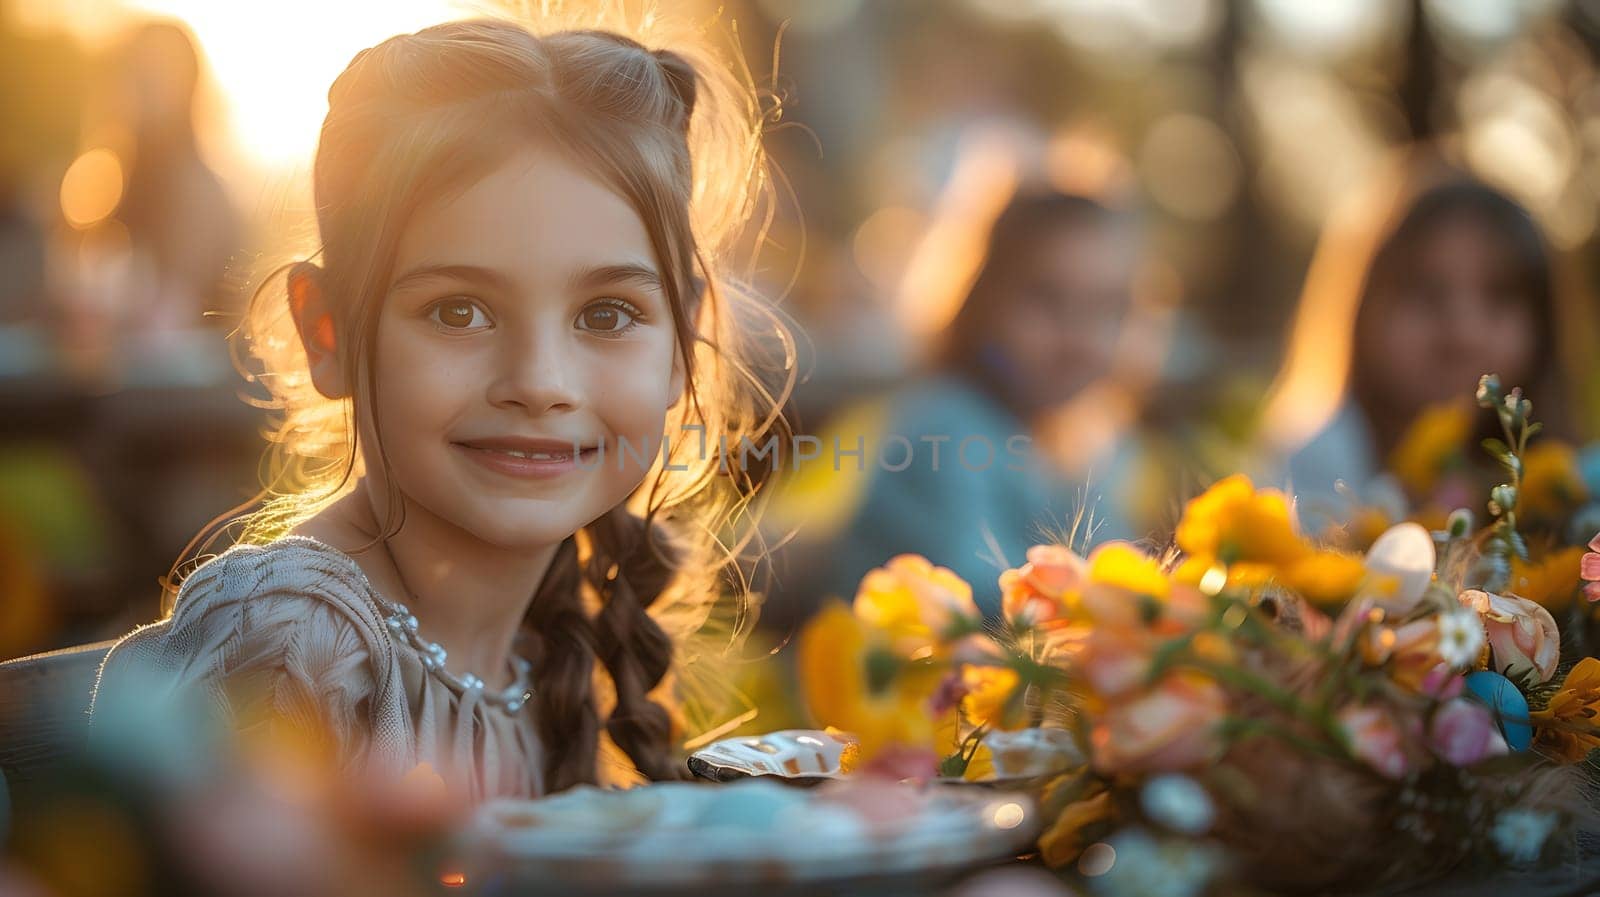 A young girl is happily seated at a table surrounded by colorful flowers, smiling at the camera. She is enjoying the fun event with people in nature